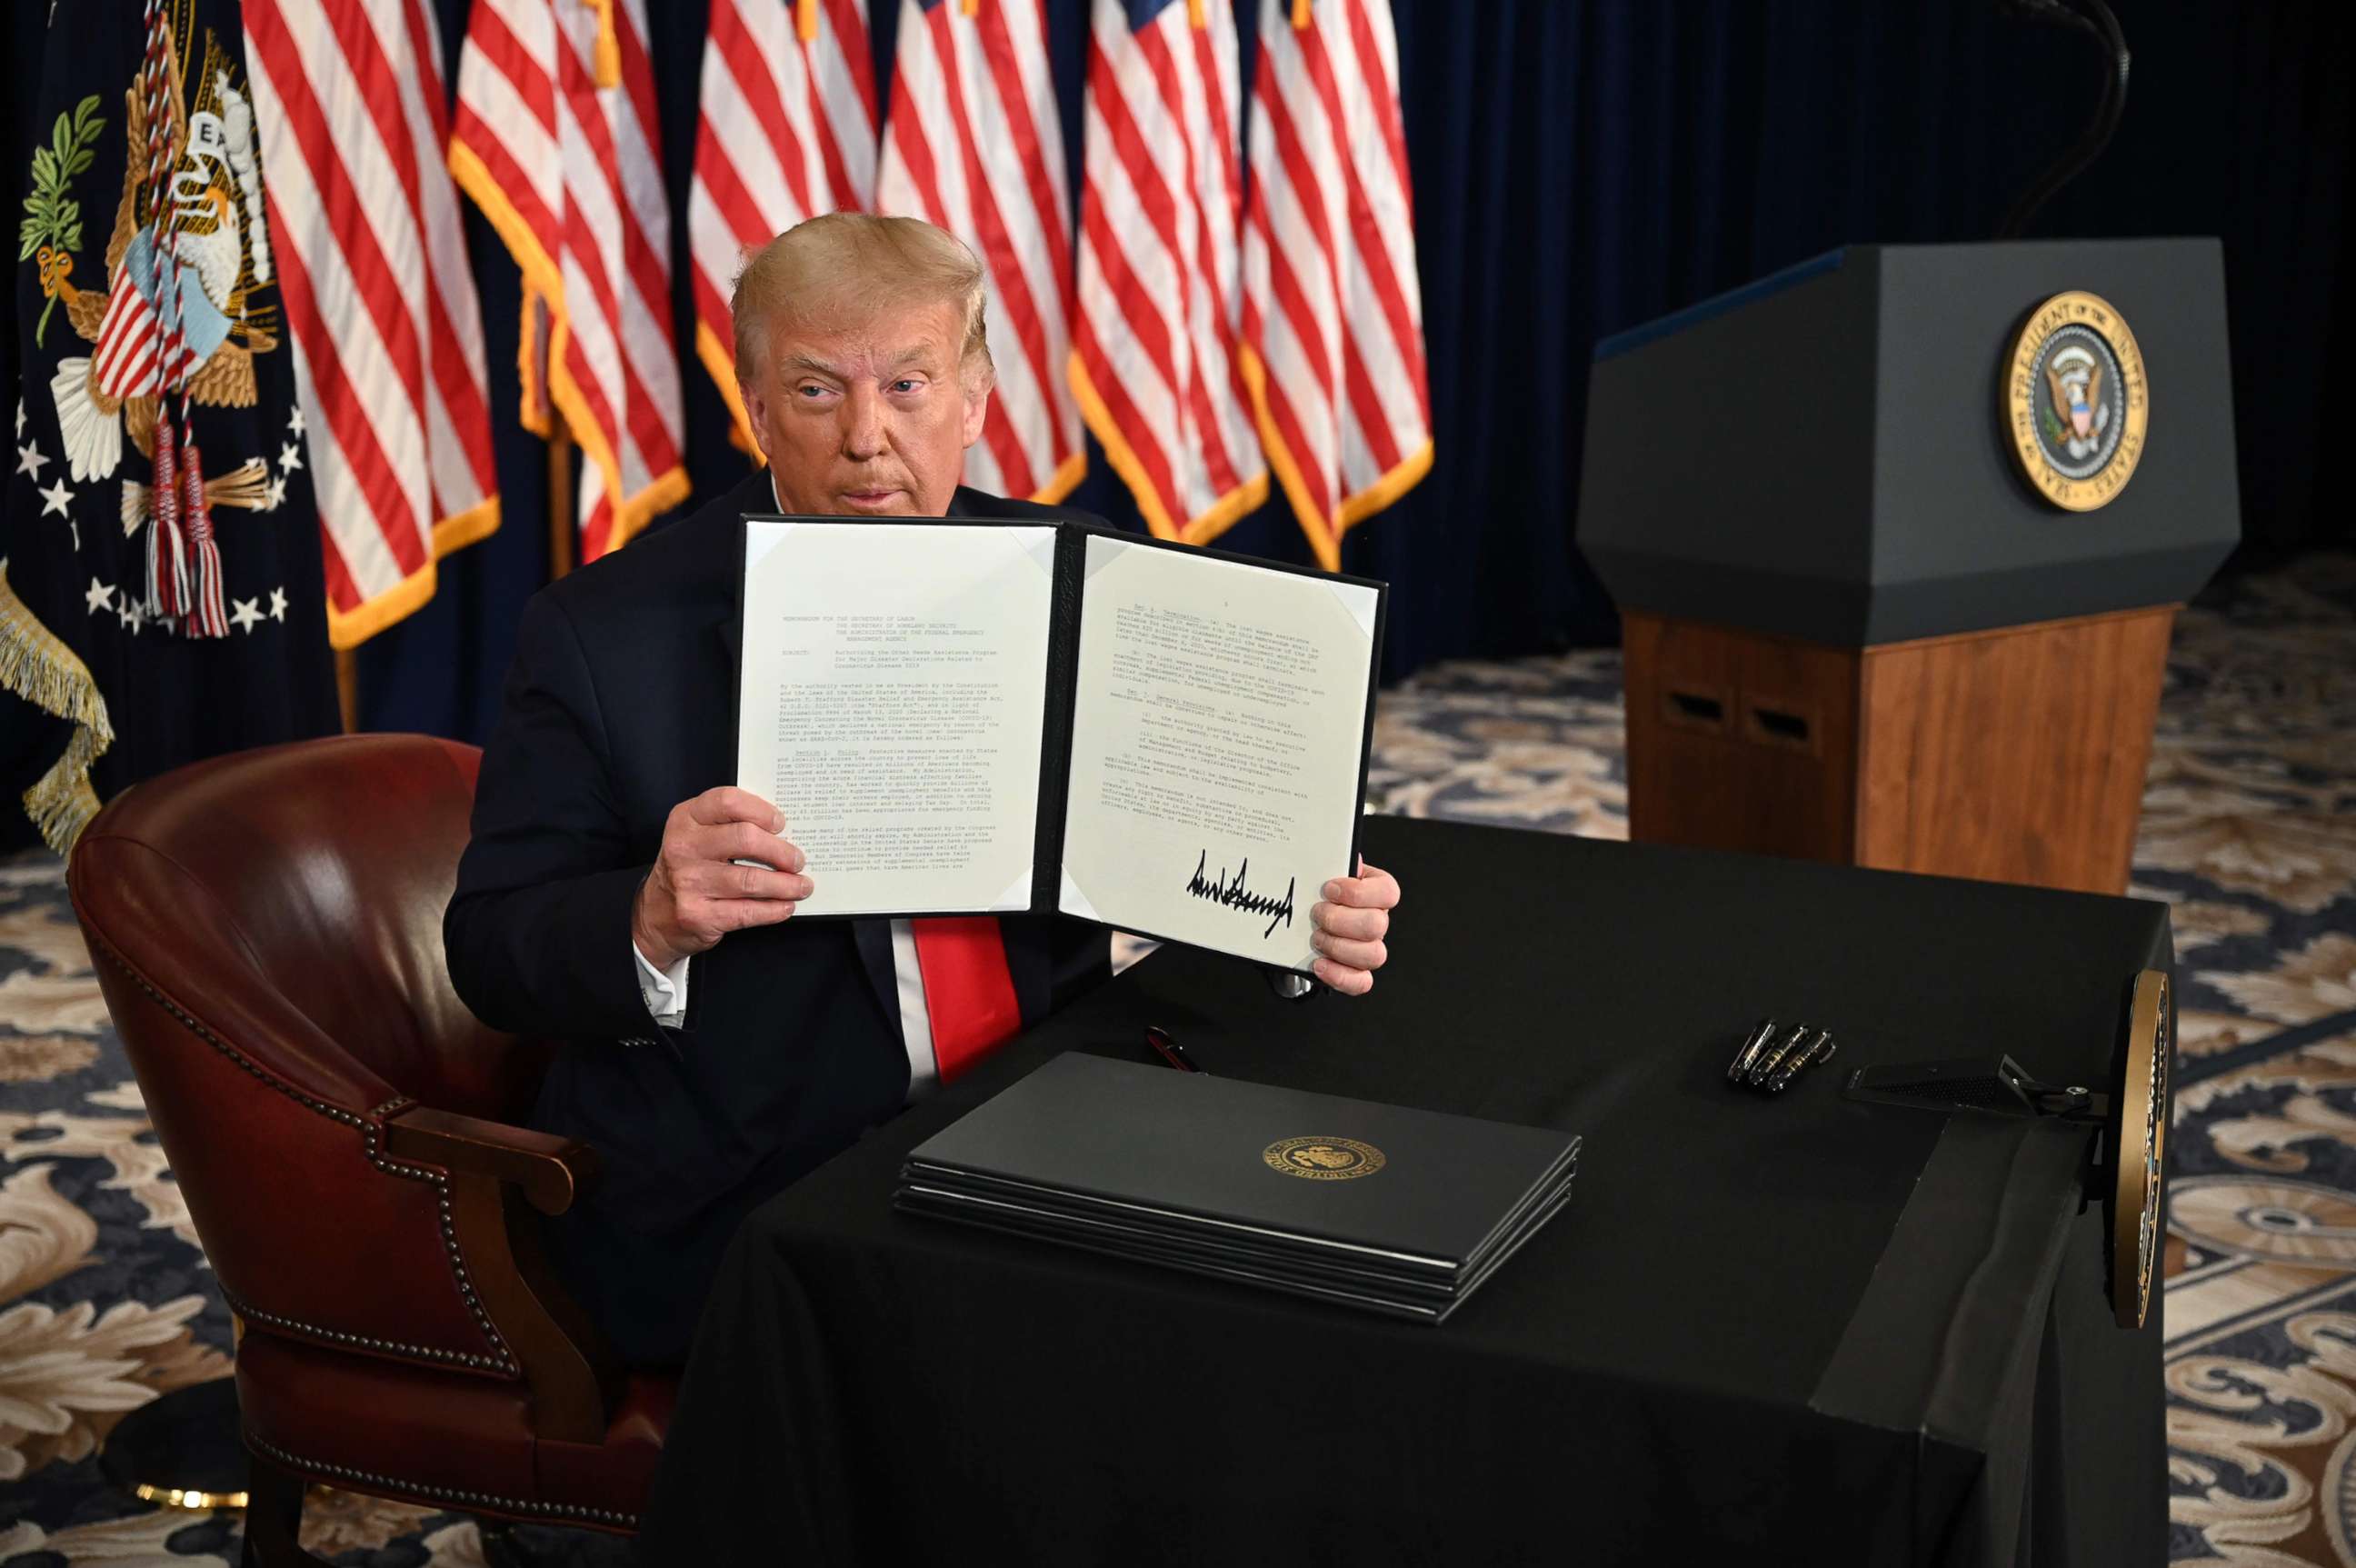 PHOTO: President Donald Trump signs executive orders extending coronavirus economic relief, during a news conference in Bedminster, N.J., on Aug. 8, 2020.